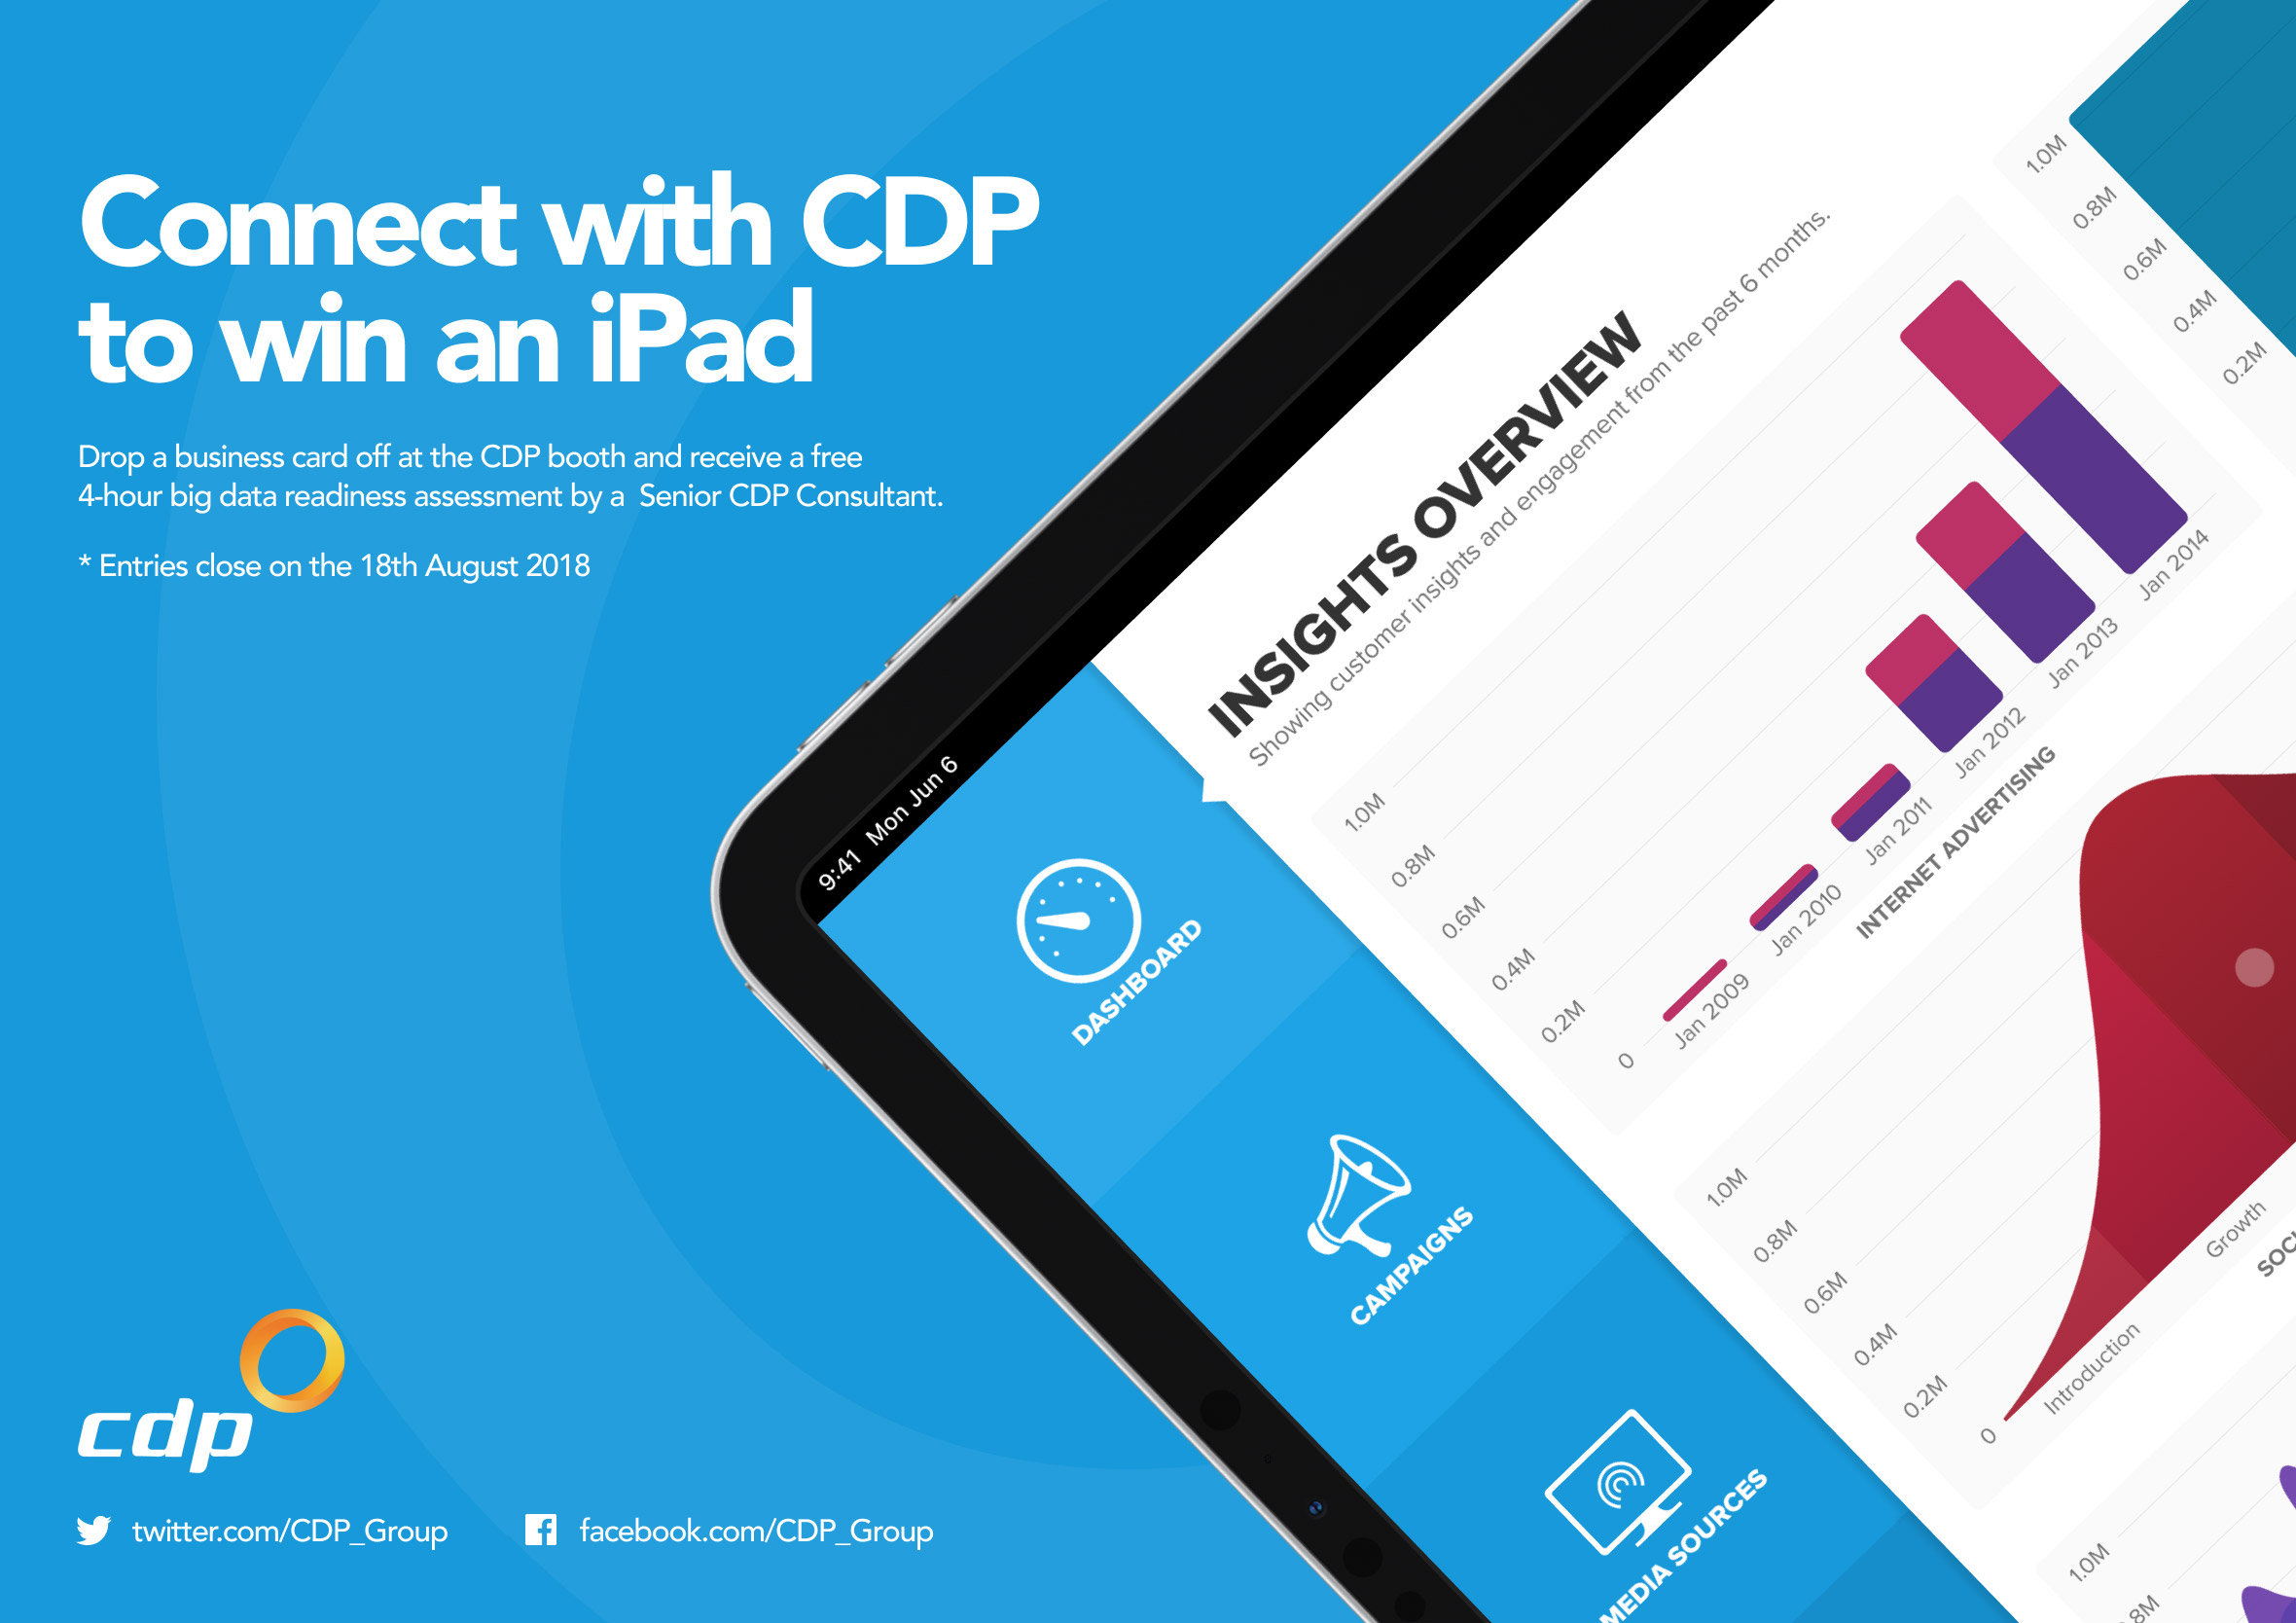 CDP executive lunch invitation lunch and learn - win an iPad